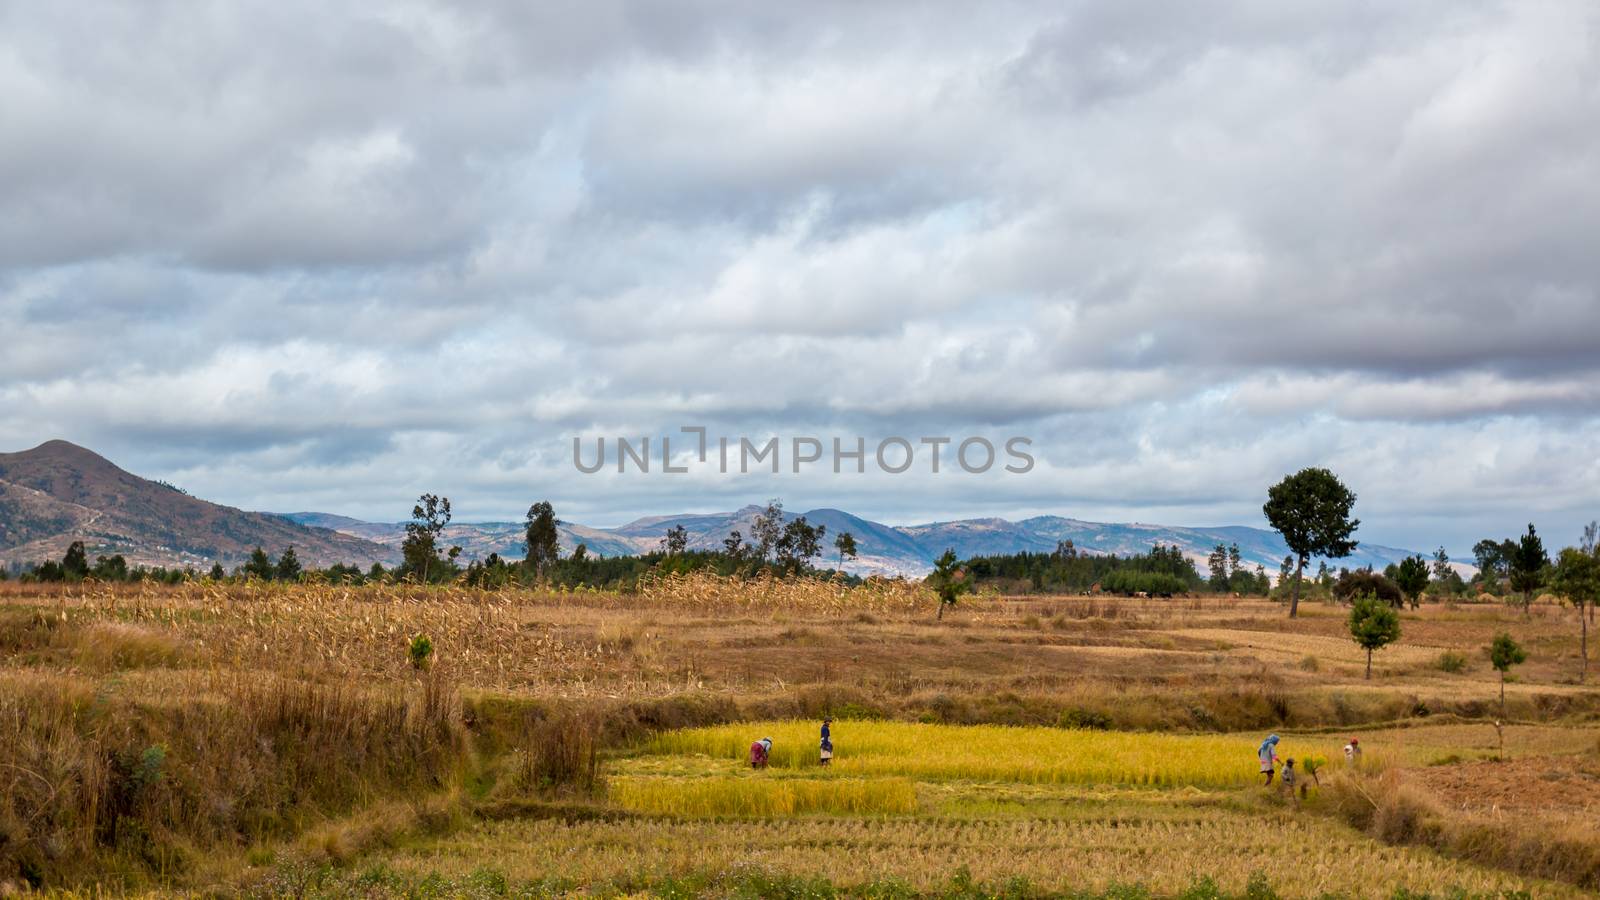 Malagasy men and women working in the fields during harvest time in the central highland regions of Madagascar on May 23, 2014.